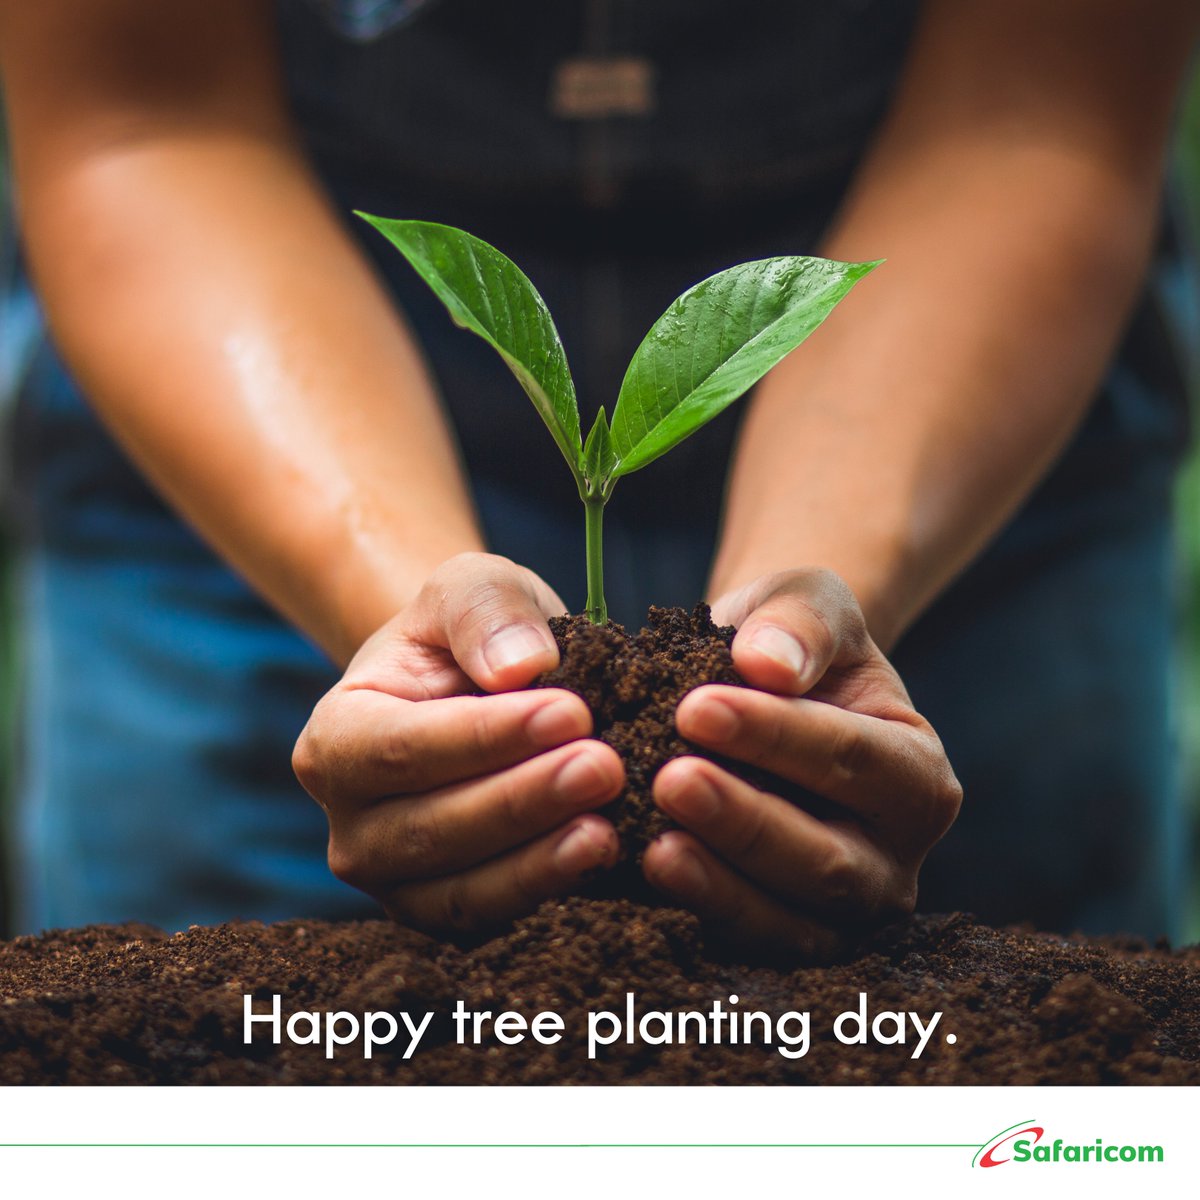 Happy Tree Planting Day! 

Let's all plant a tree today for the benefit of the environment and the future generation. Great things happen when we come together!

Have you planted a tree today?

#PlantATree